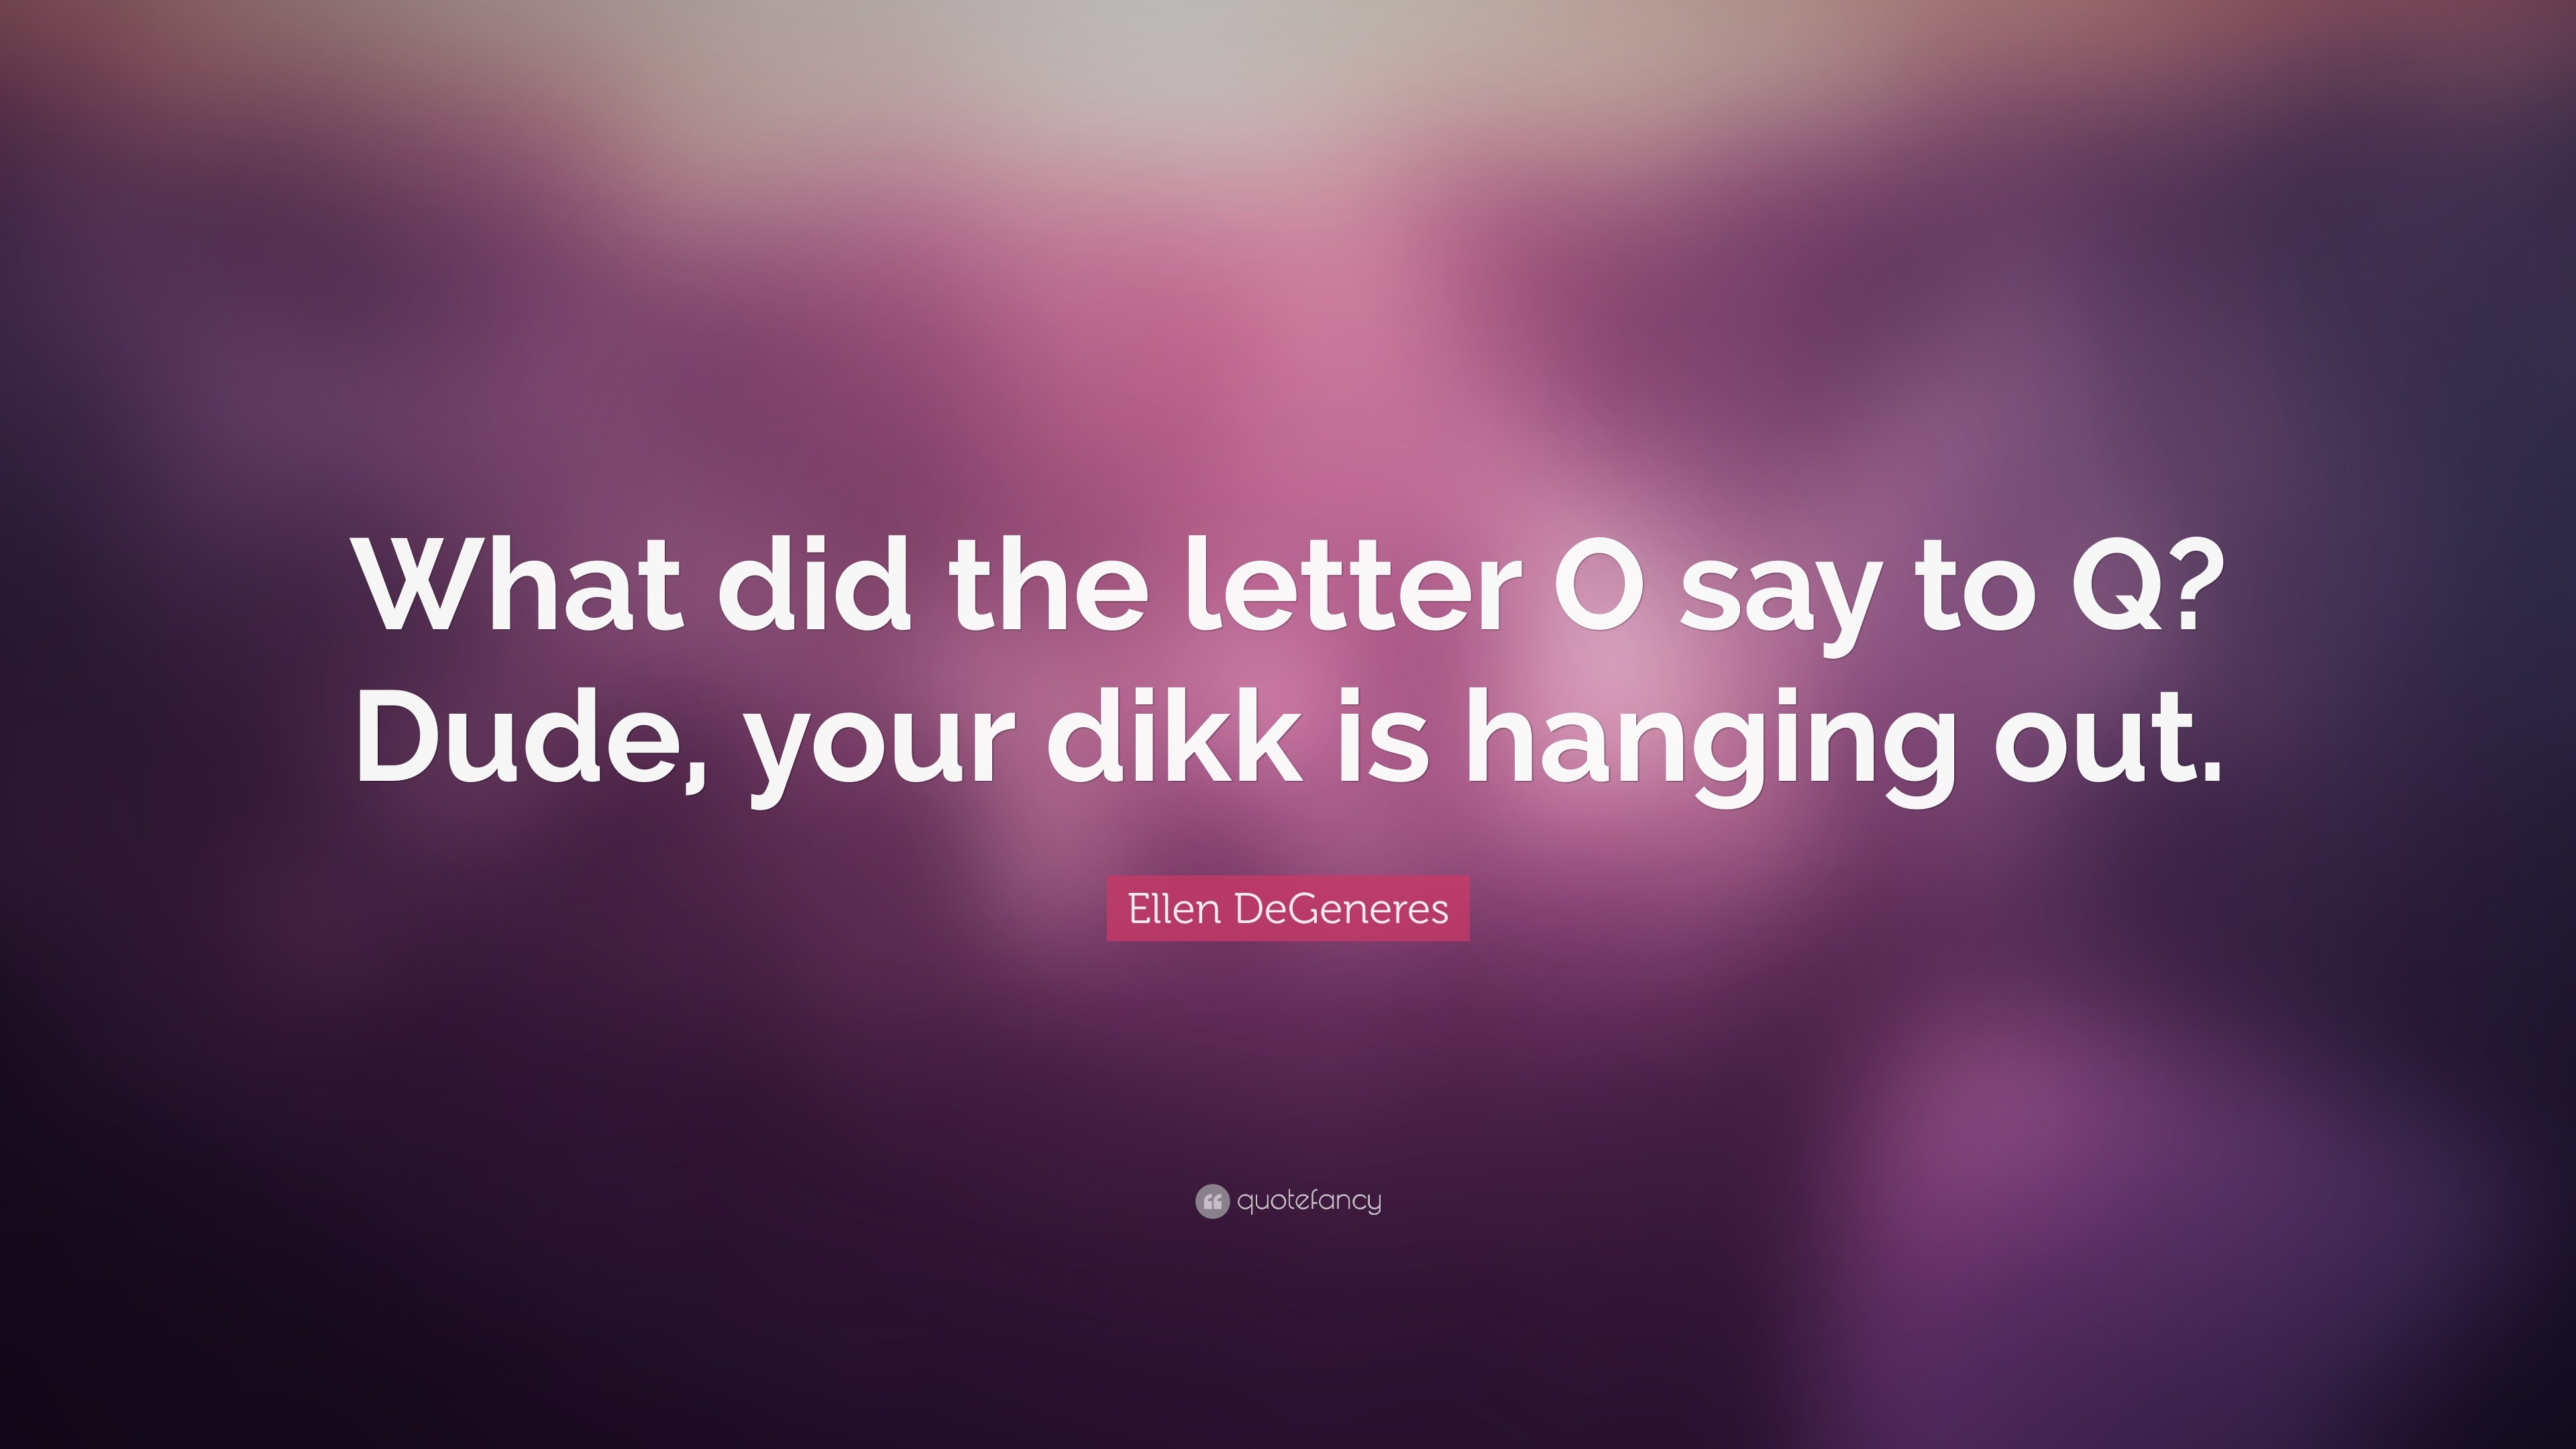 3840x2160 Ellen DeGeneres Quote: “What did the letter O say to Q? Dude,